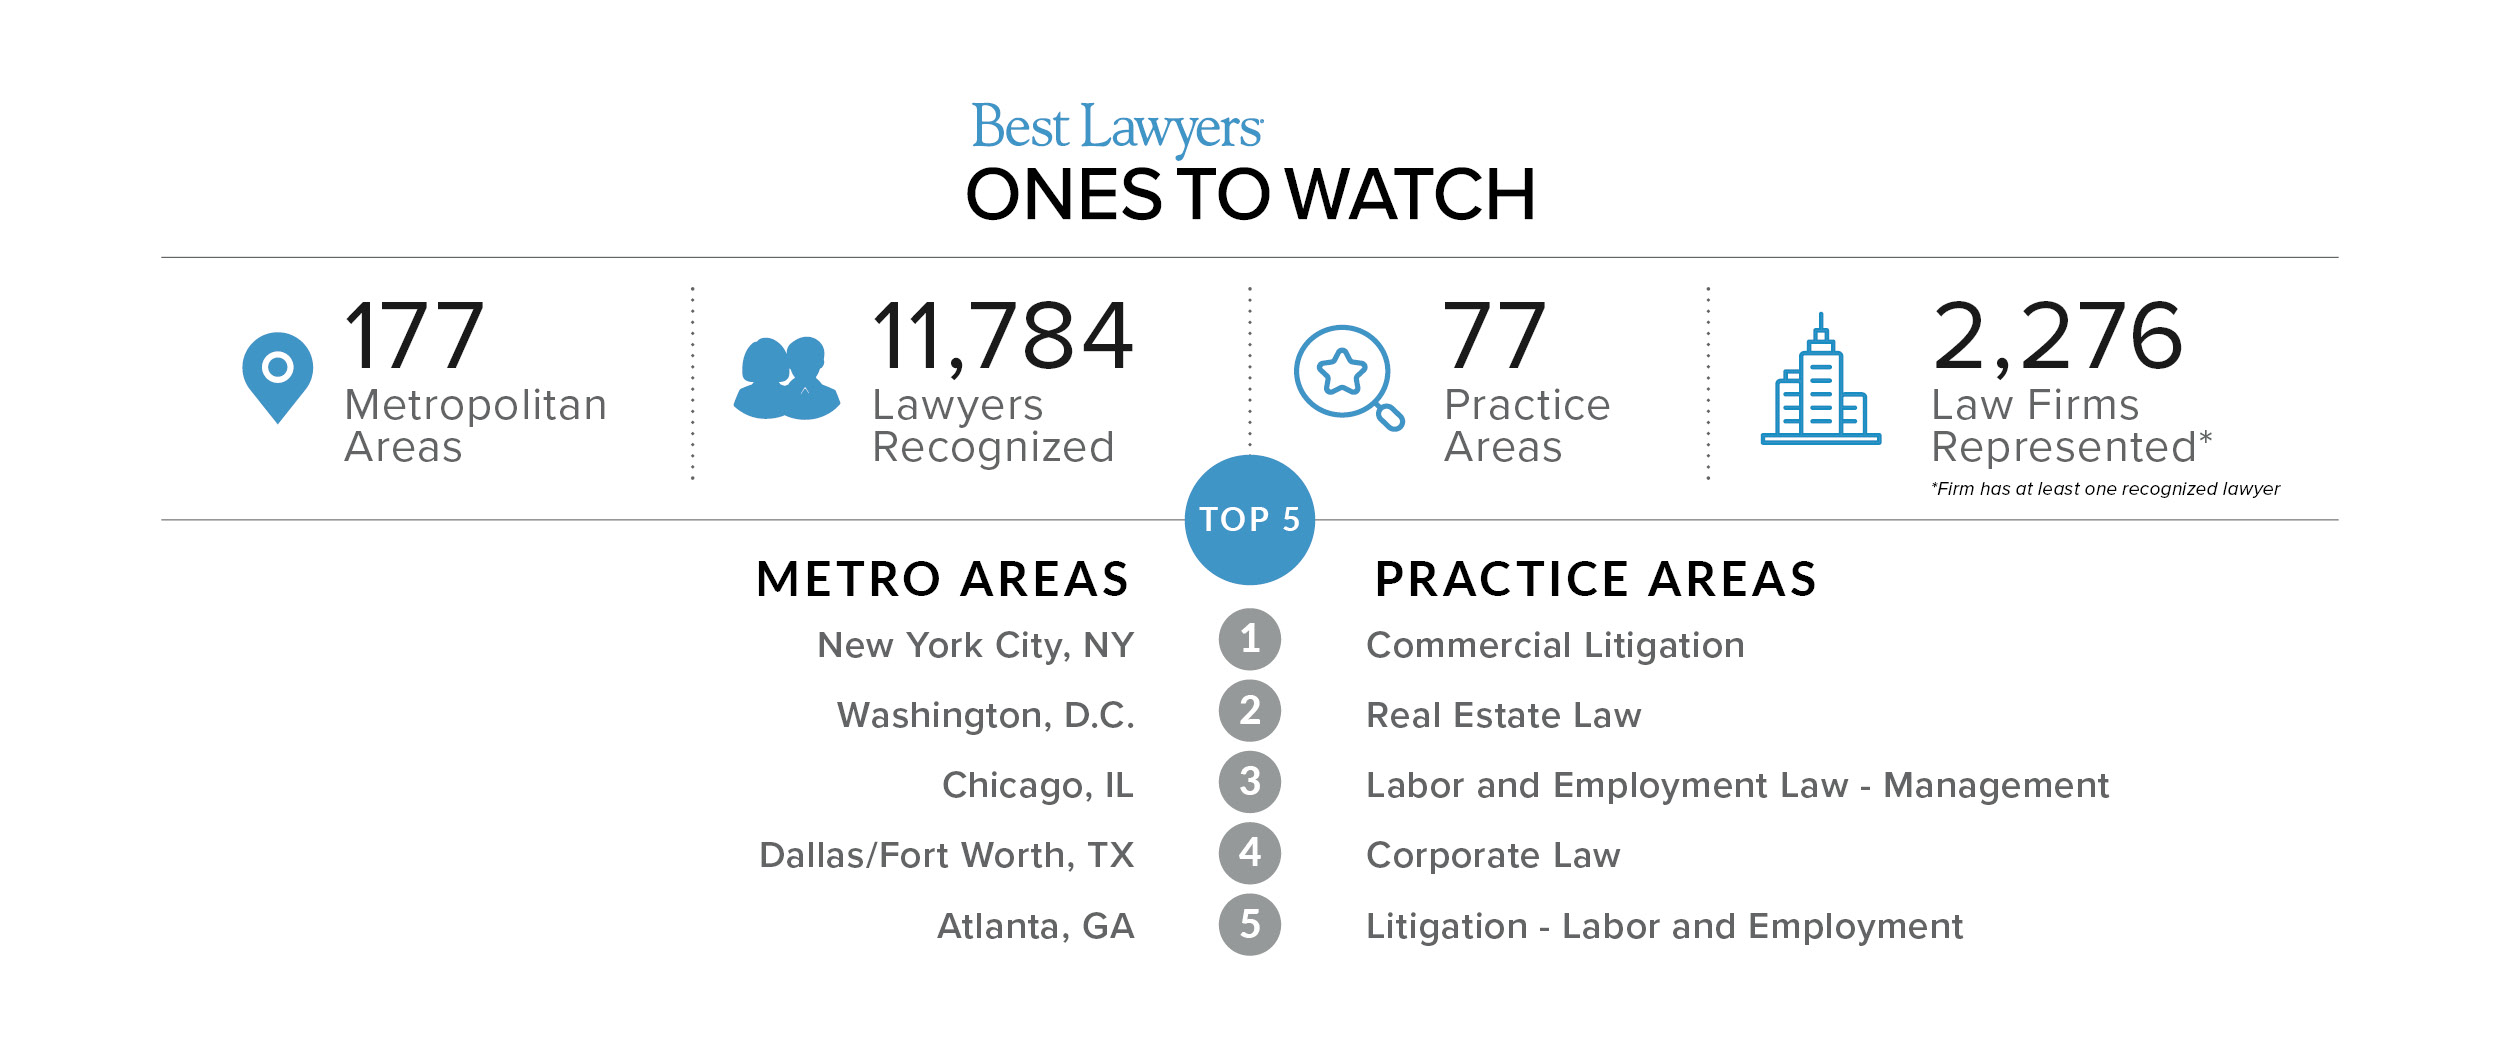 Best Lawyers: Ones to Watch First Edition Stats